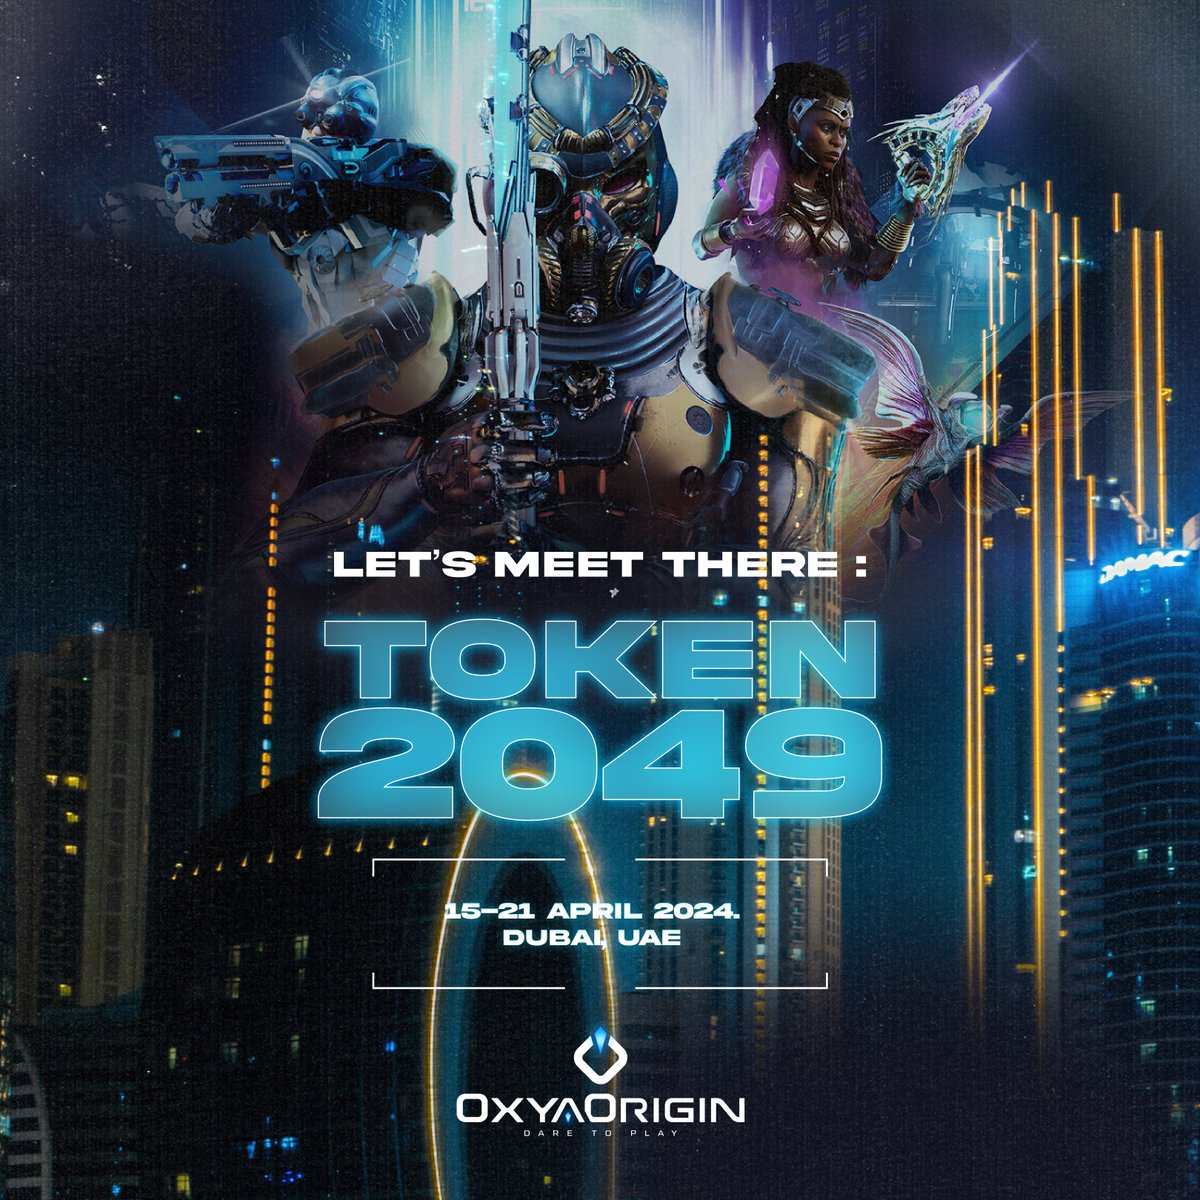 The Oxya Origin team is excited to be attending Token 2049 in Dubai this week 🌍 Meet fellow holders and early believers in this setting. We'll be sharing our new vision and roadmap with you 👀